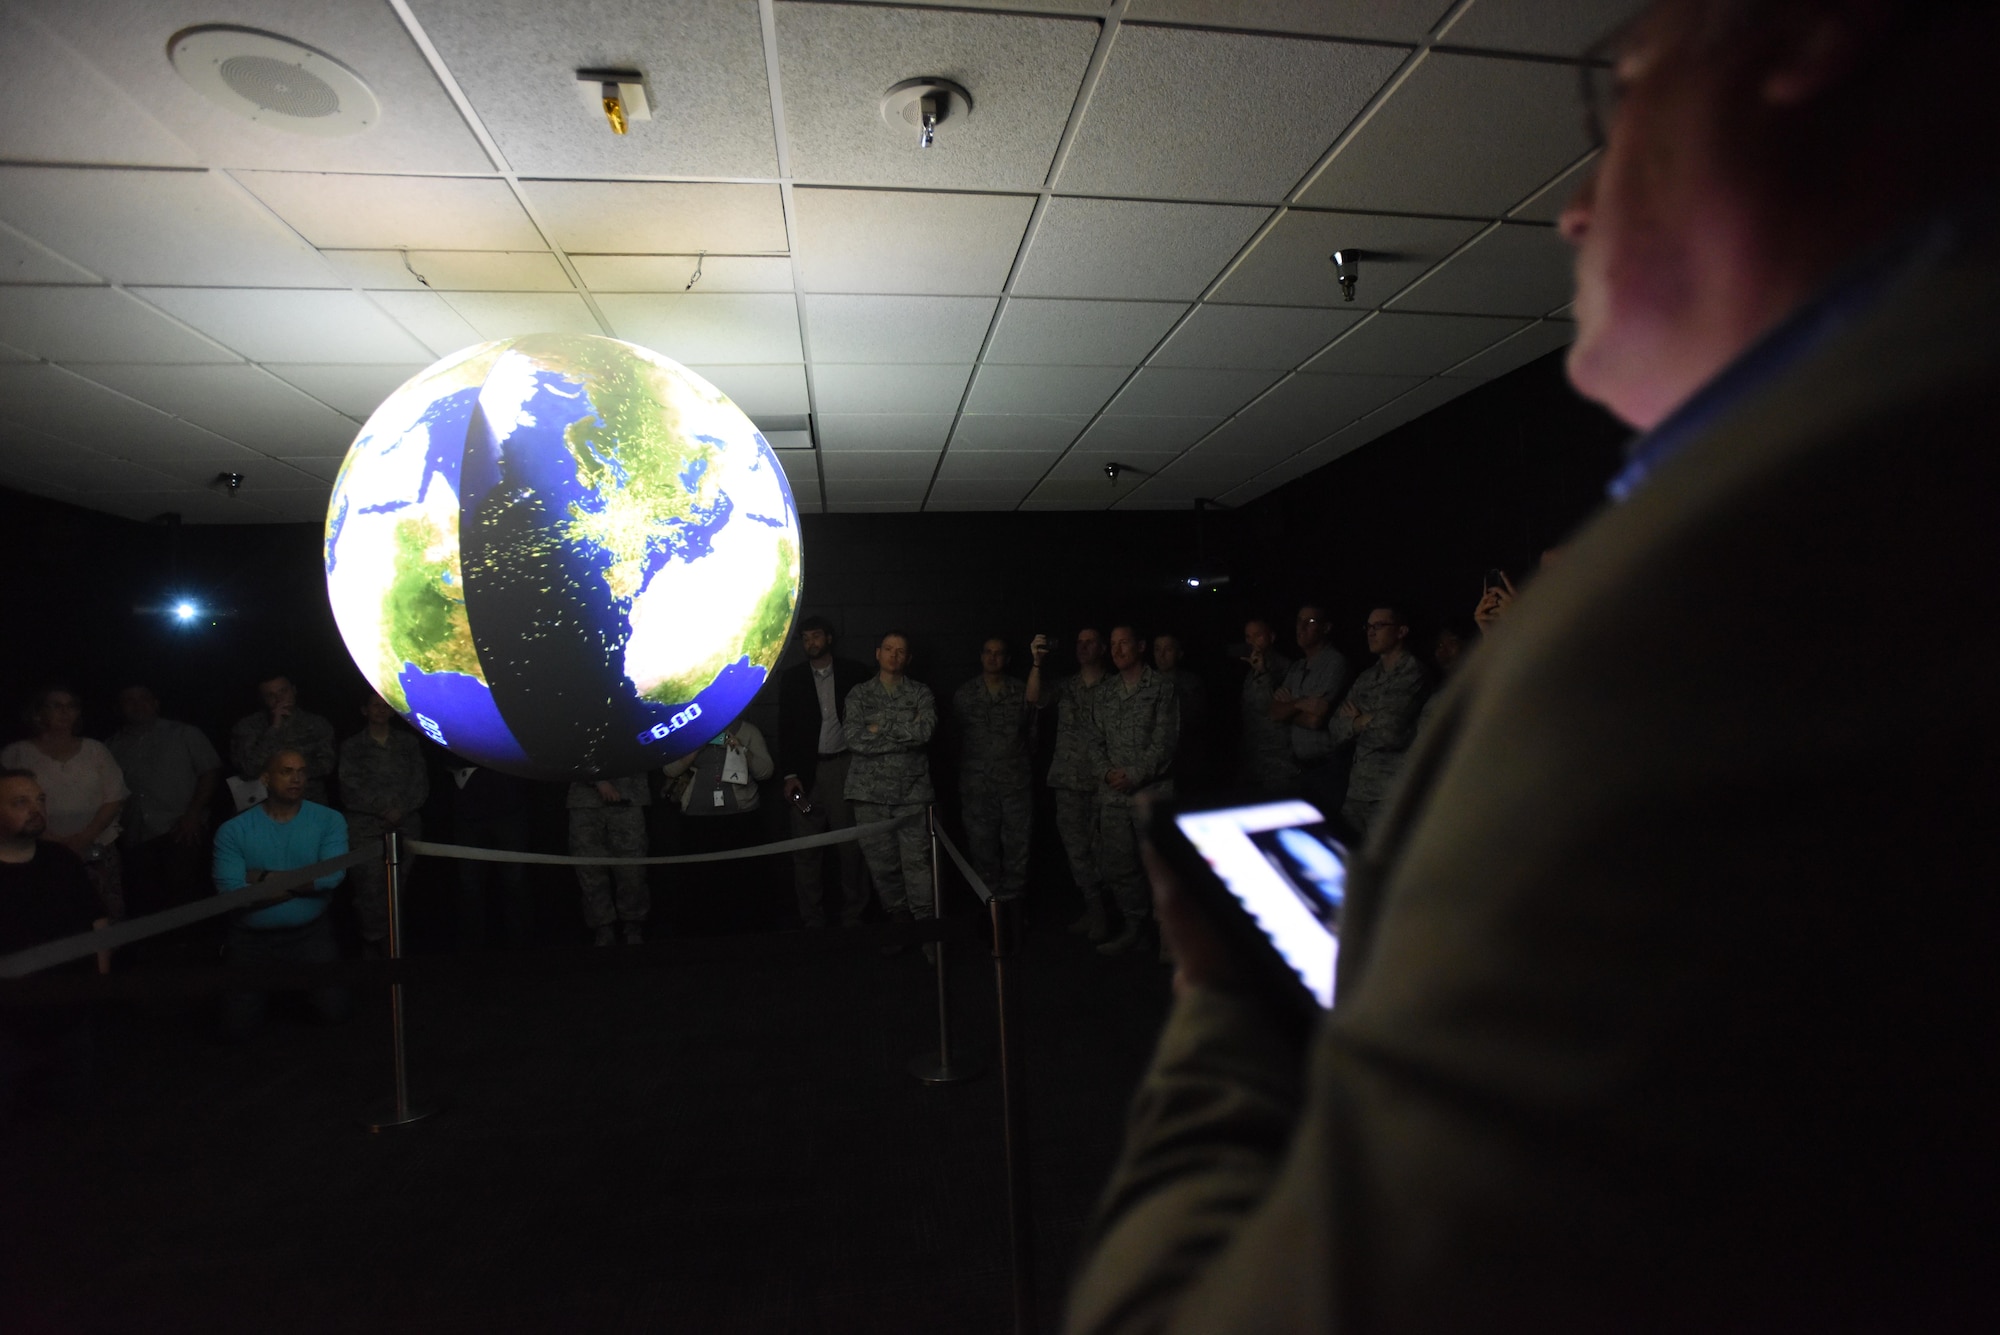 Keesler personnel watch a Science on a Sphere demonstration during a ribbon cutting ceremony at the Weather Training Complex March 23, 2017, on Keesler Air Force Base, Miss. This latest training aid displays planetary data onto a suspended carbon-fiber sphere helping instructors enhance student’s understanding of the atmosphere. (U.S. Air Force photo by Kemberly Groue)